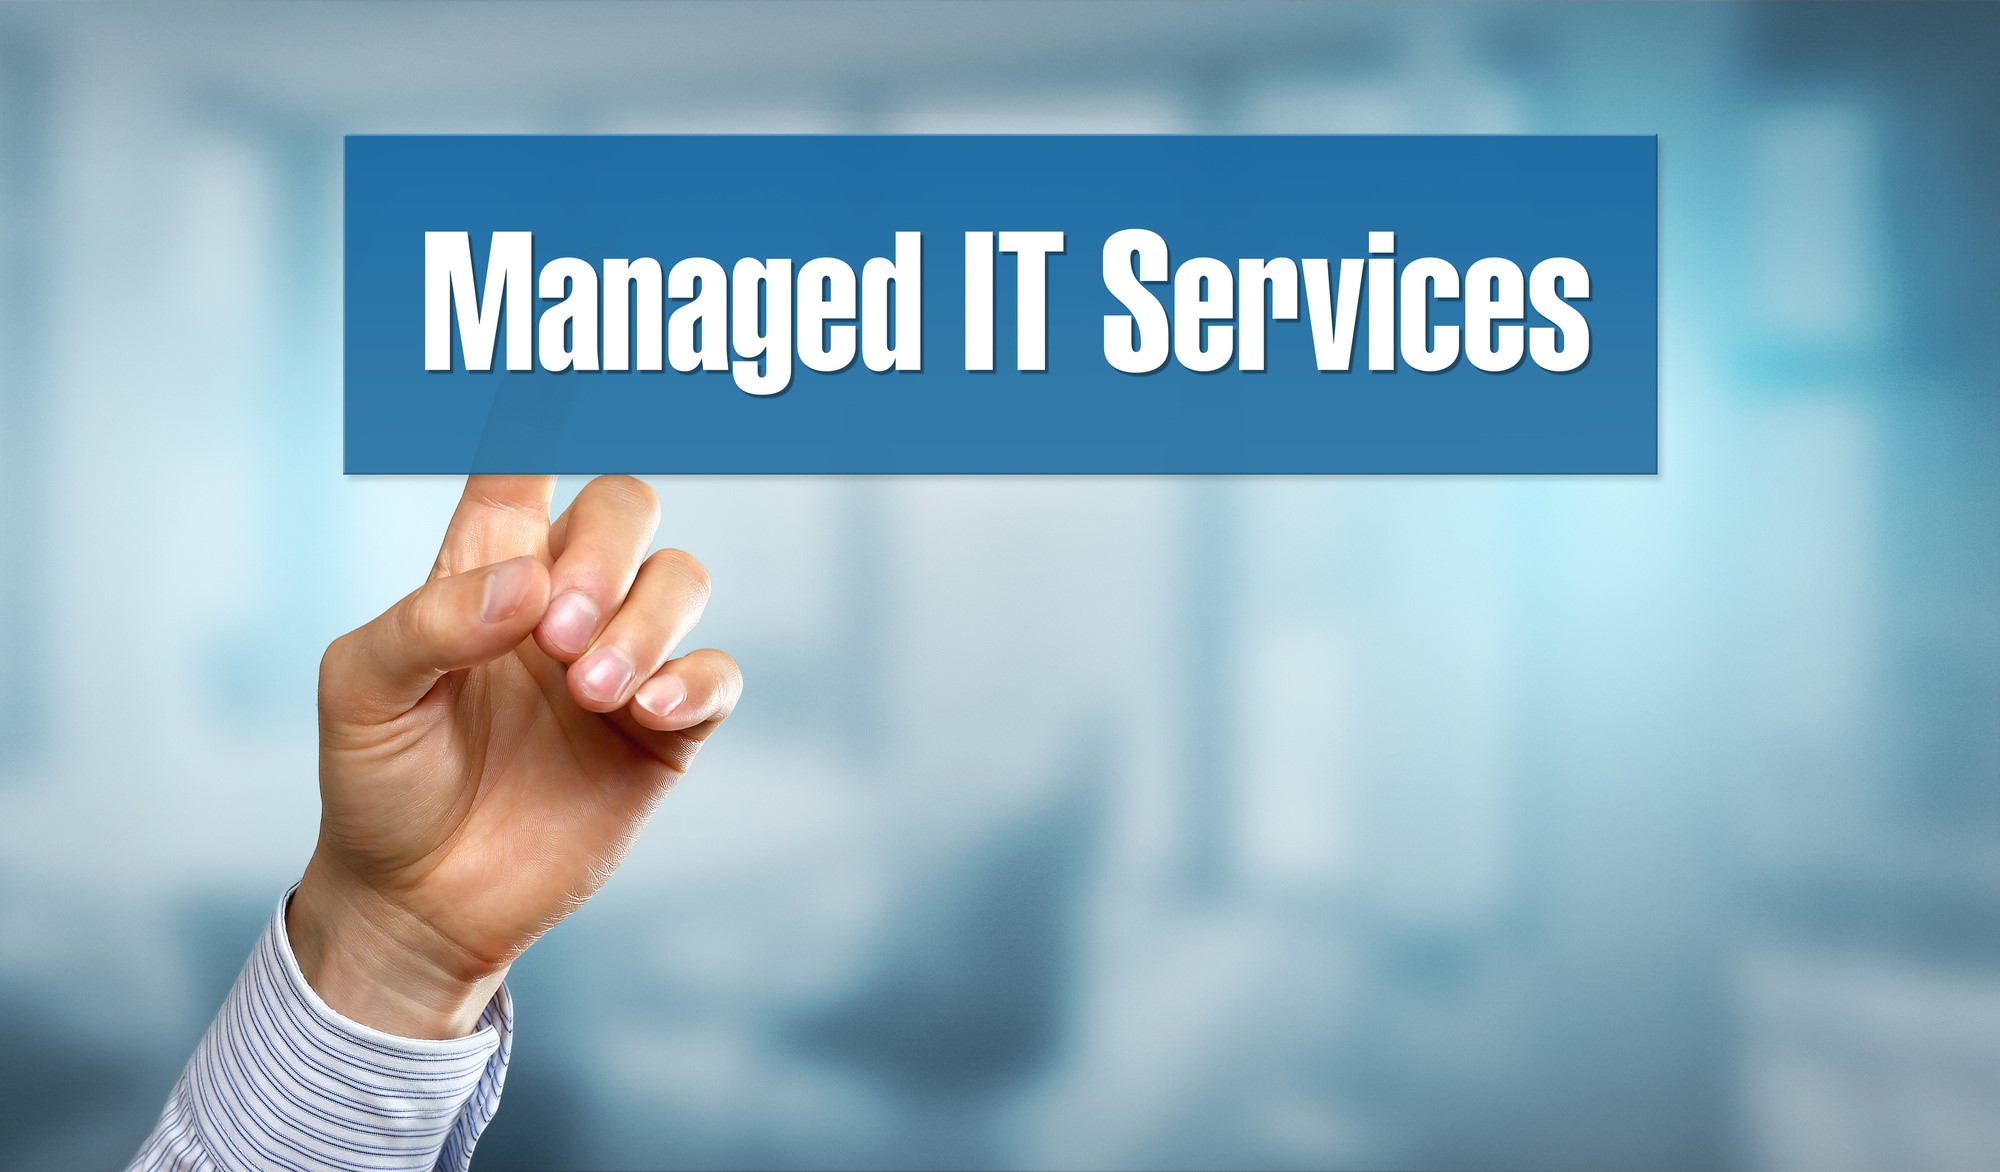 The Important Questions to Ask an IT Service Provider